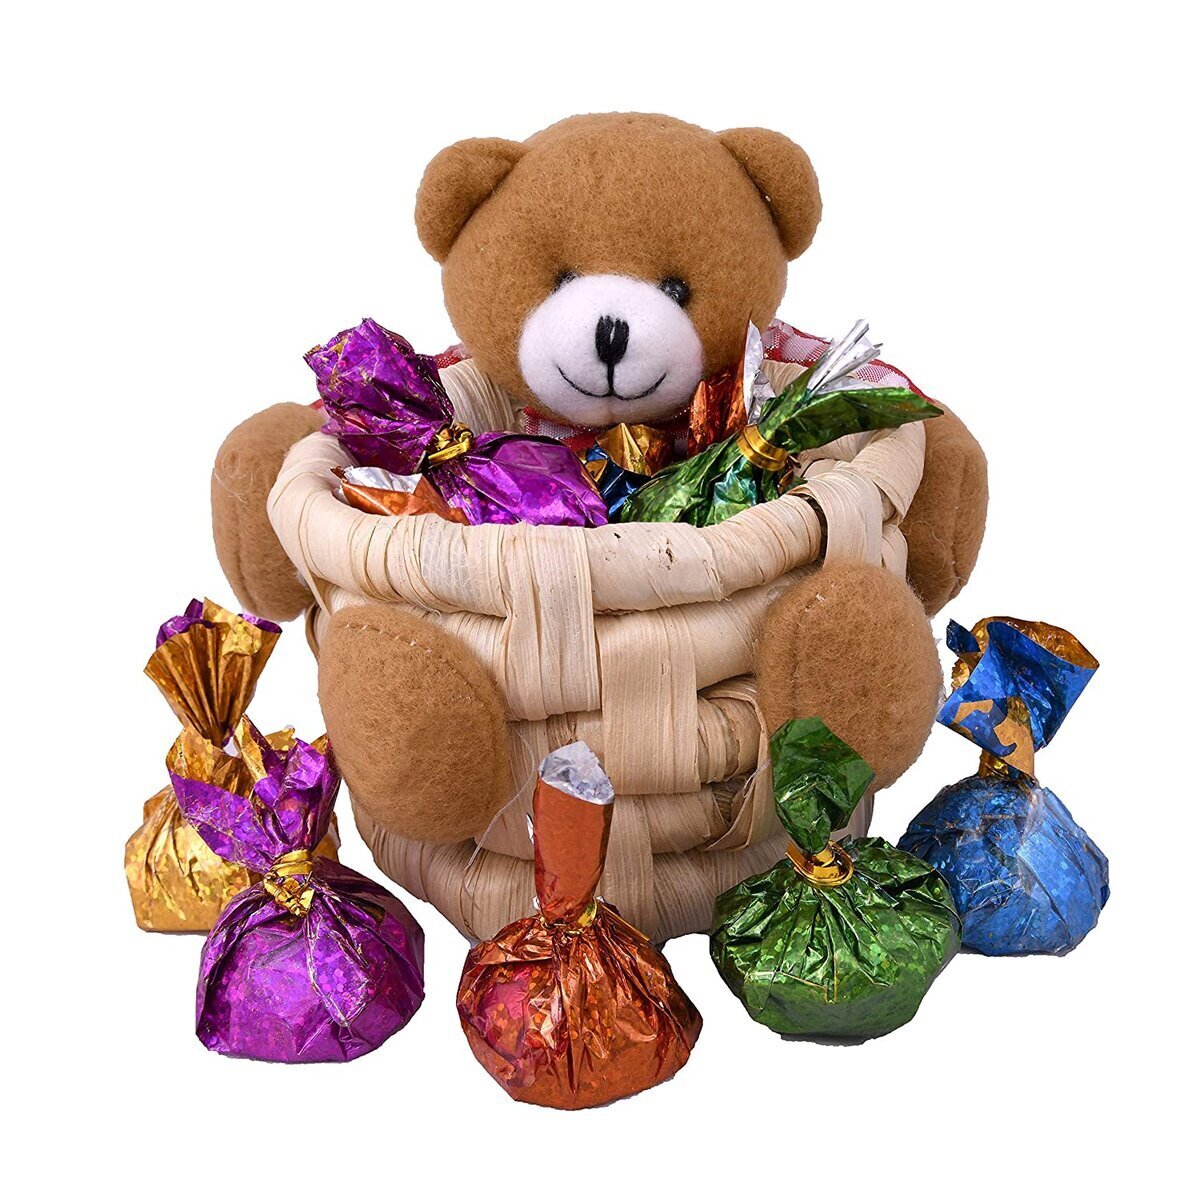 Anniversary Gift for Couple/ Anniversary Gift Hamper/Anniversary Gift for  Friends/Chocolate Gift-Basket+Chocolate Filled Teddy Bear+Fur Heart+Scented  Candle+Anniversary Card